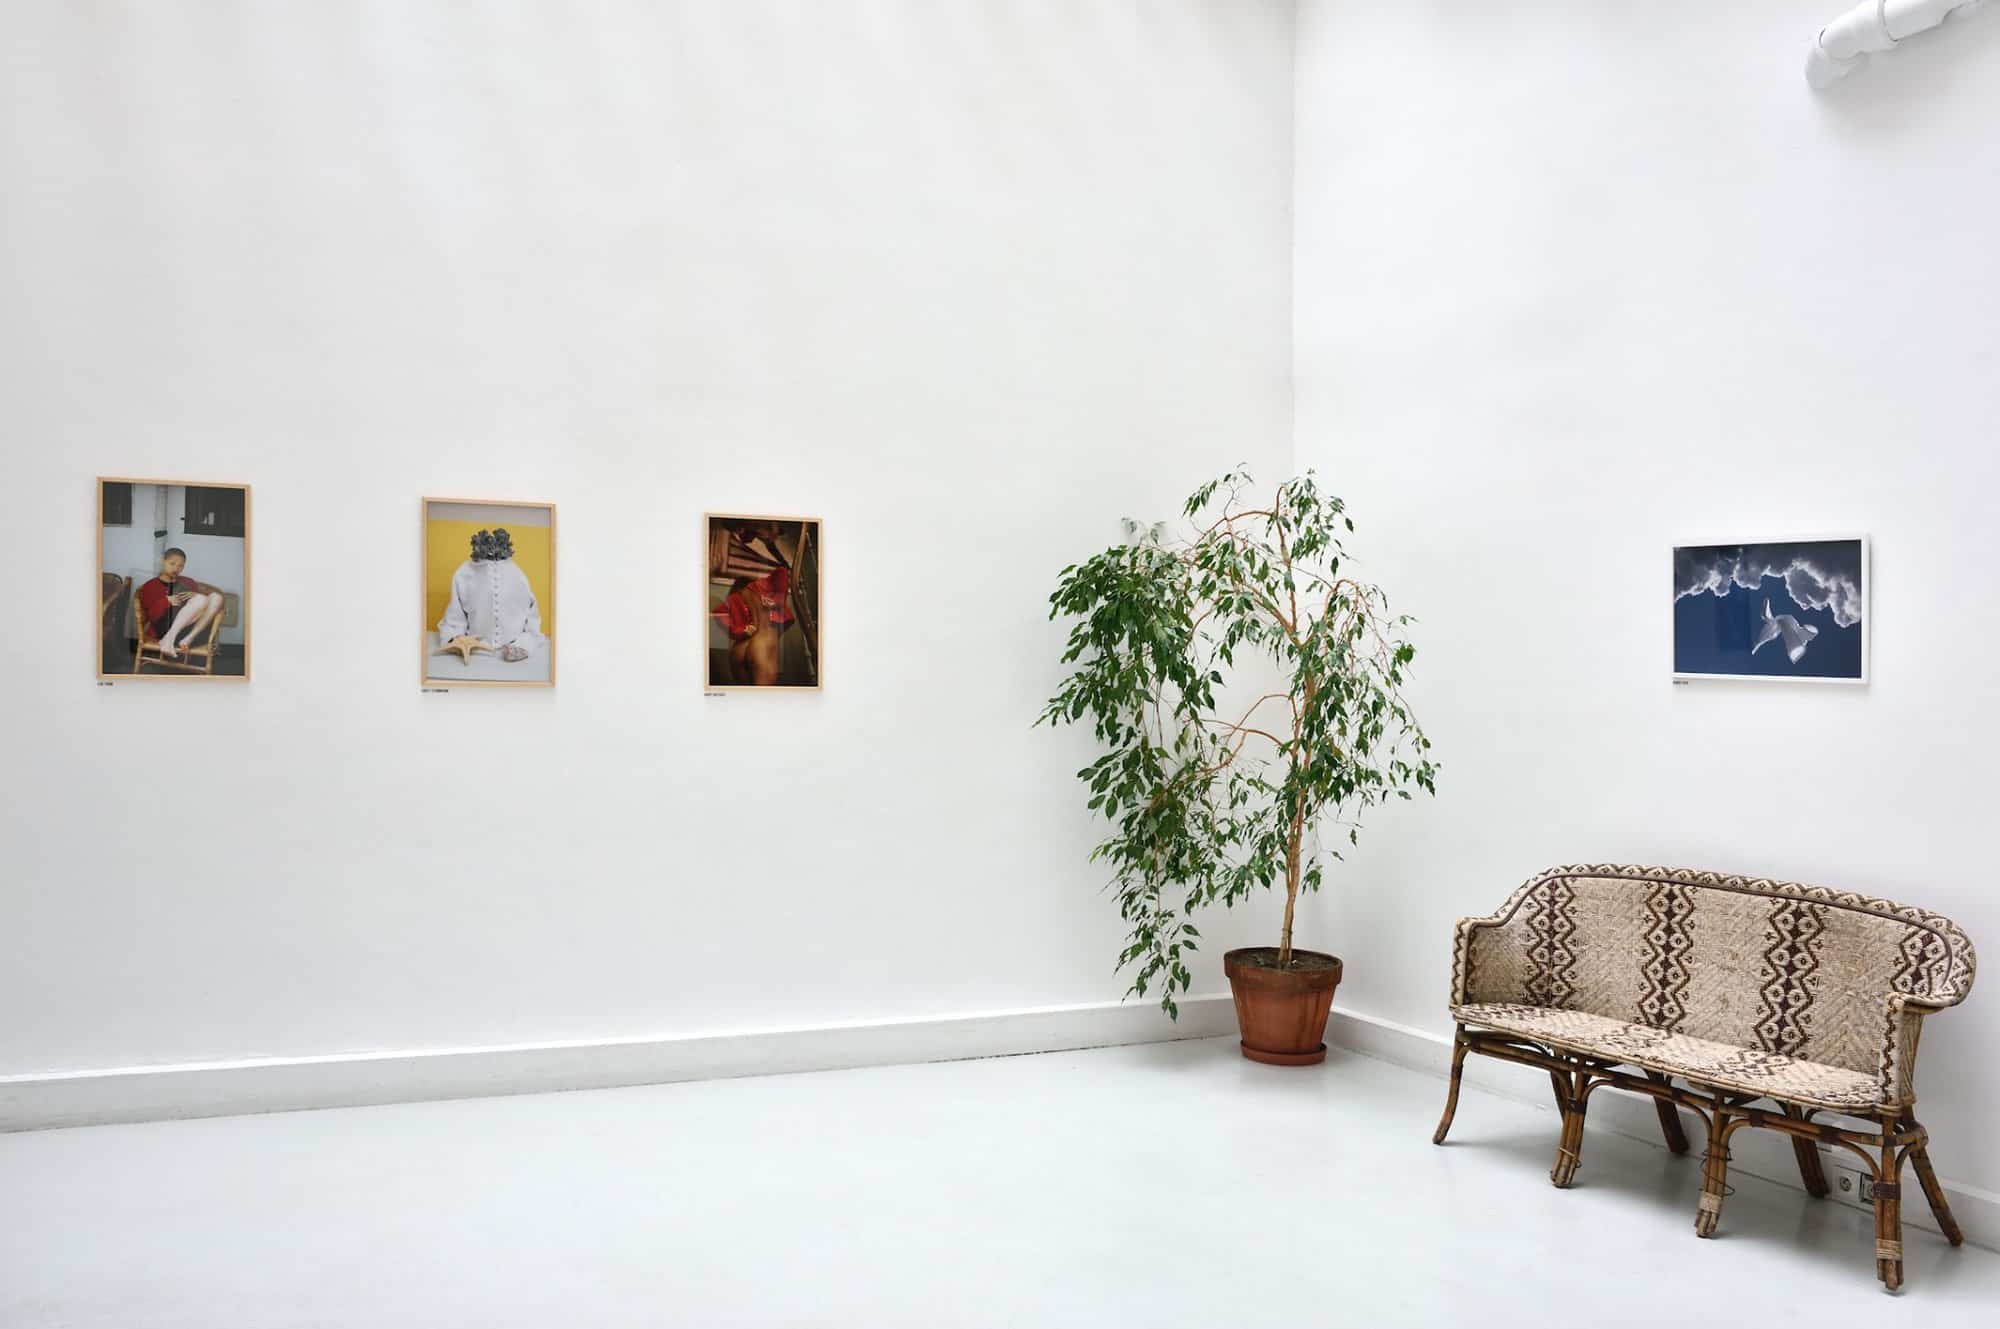 A white room with three small photographs in frames on the front wall. There is a potted plant in the right corner of the room. Next to the plant, there is a brown patterned bench against the wall with another framed photograph above it.